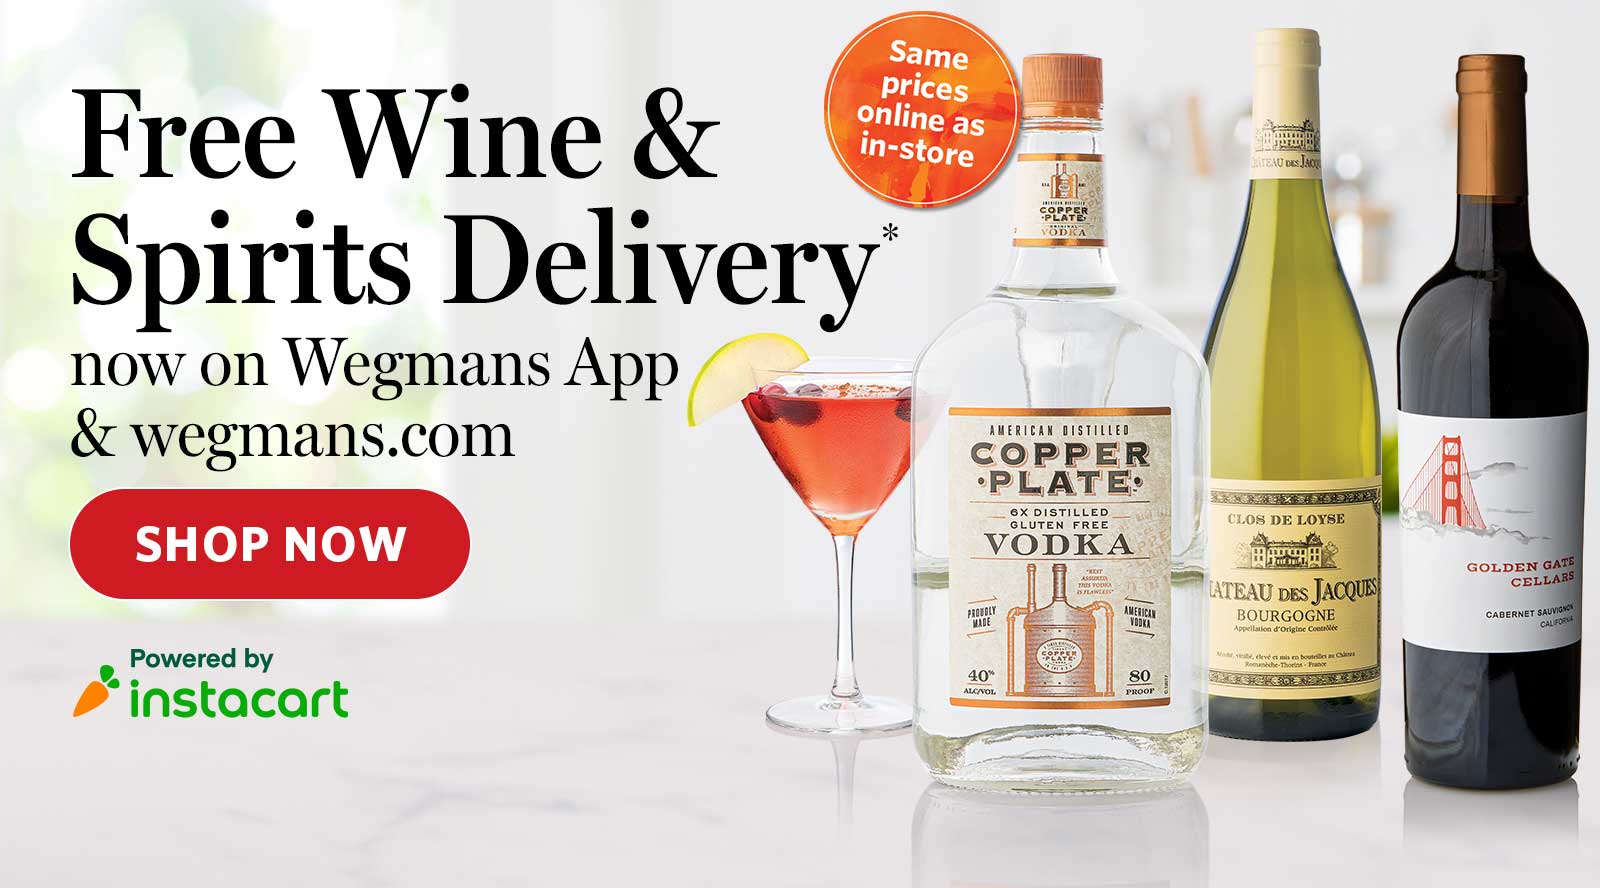 Free wine and spirits delivery no on the Wegmans App and wegmans.com - shop now